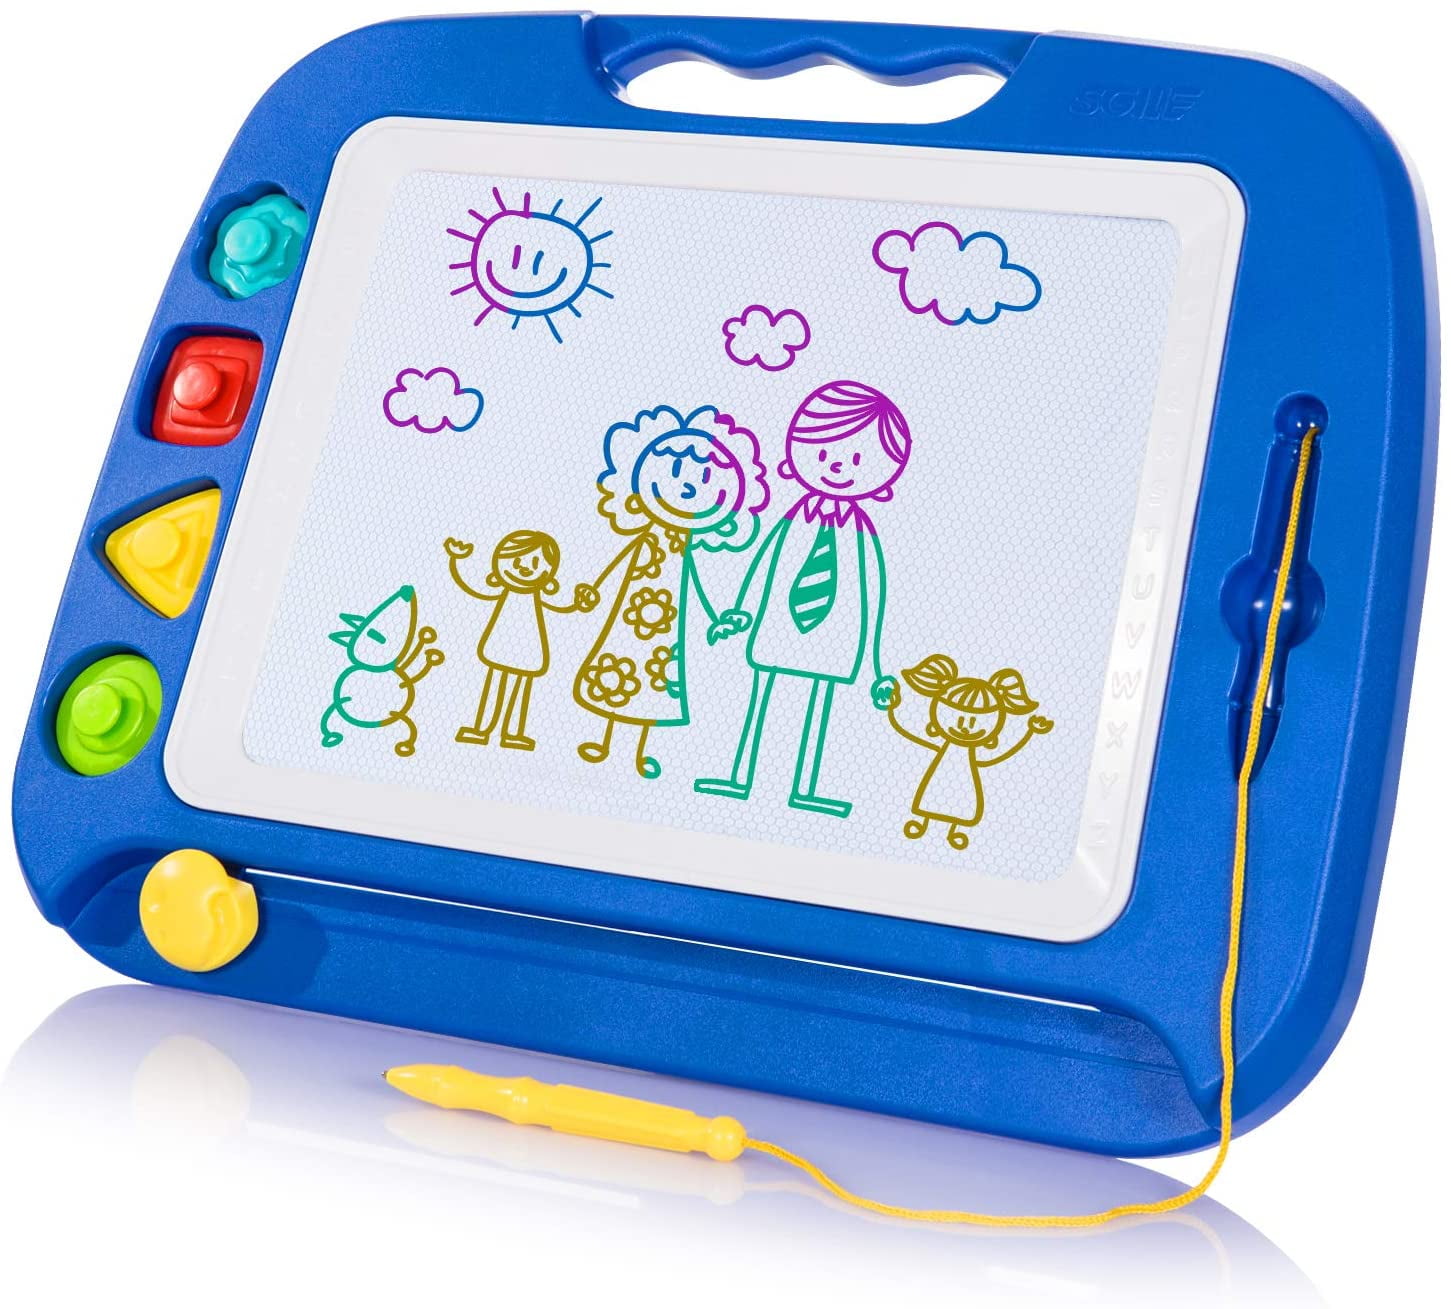  Seimome Magnetic Drawing Doodle Board, Super Sturdy Legs for  Toddler Toys, Toddler Girl Toys for 1-2 Year Old (Blue) : Toys & Games